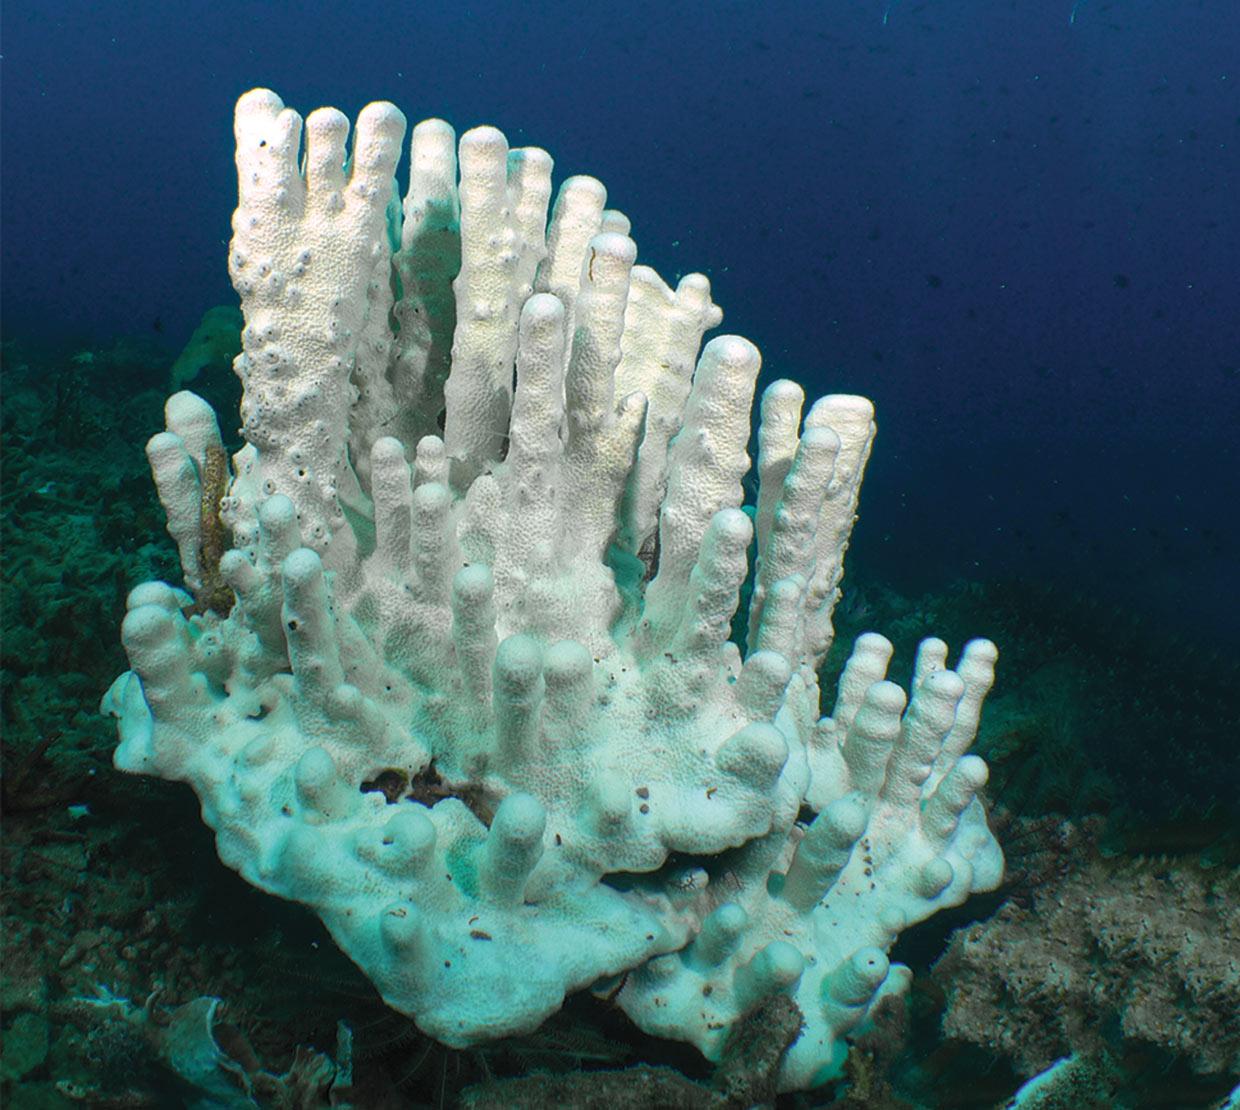 white coral at bottom floor of shallow ocean